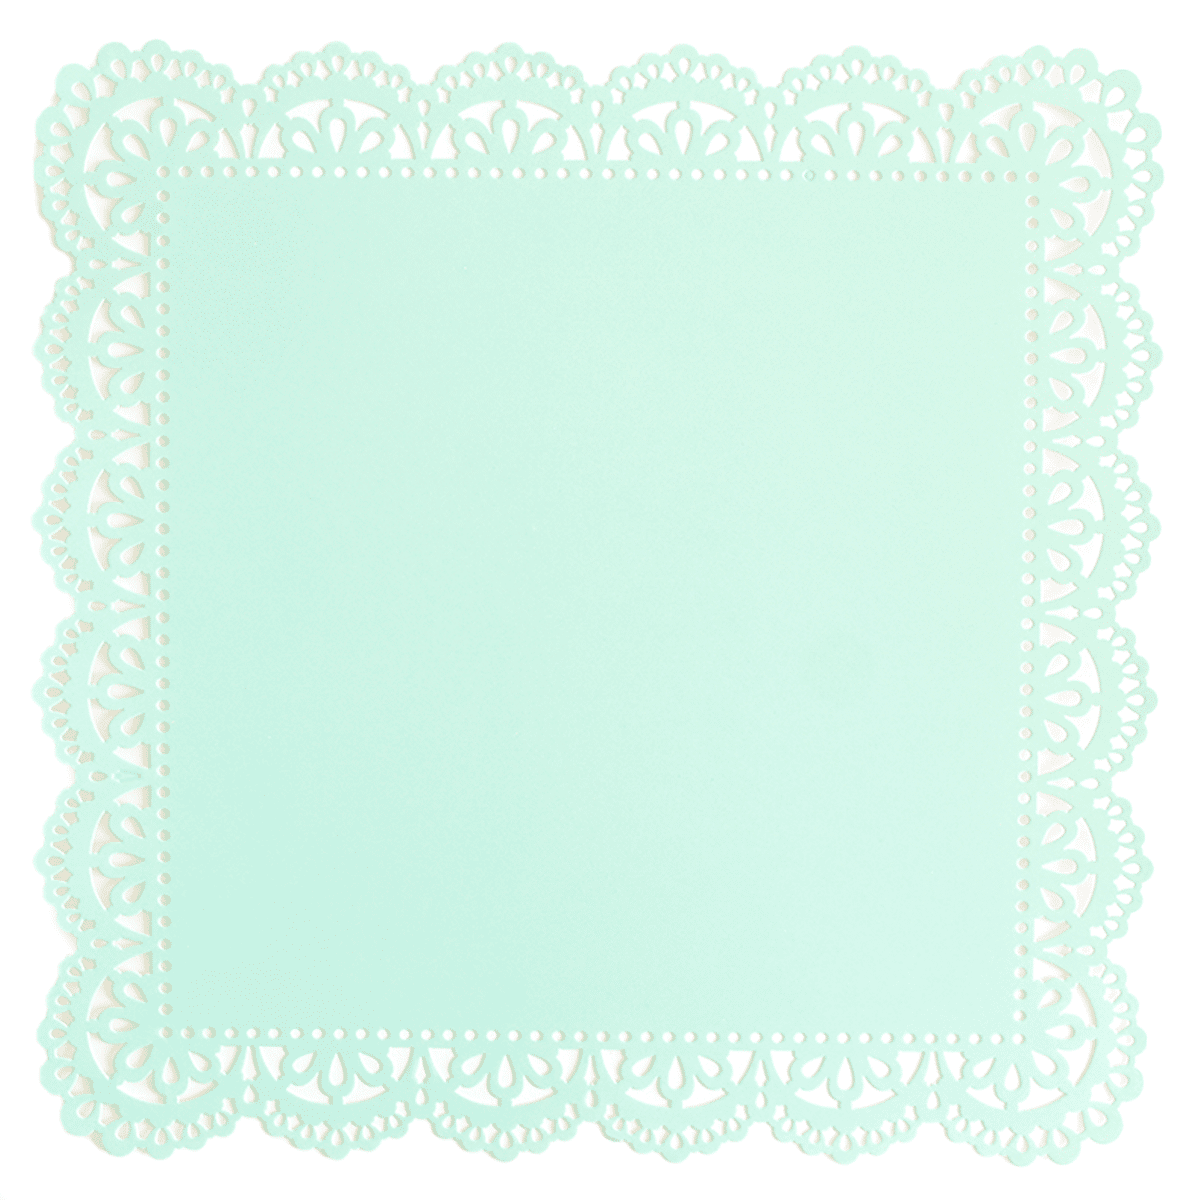 a light green paper with a white border.